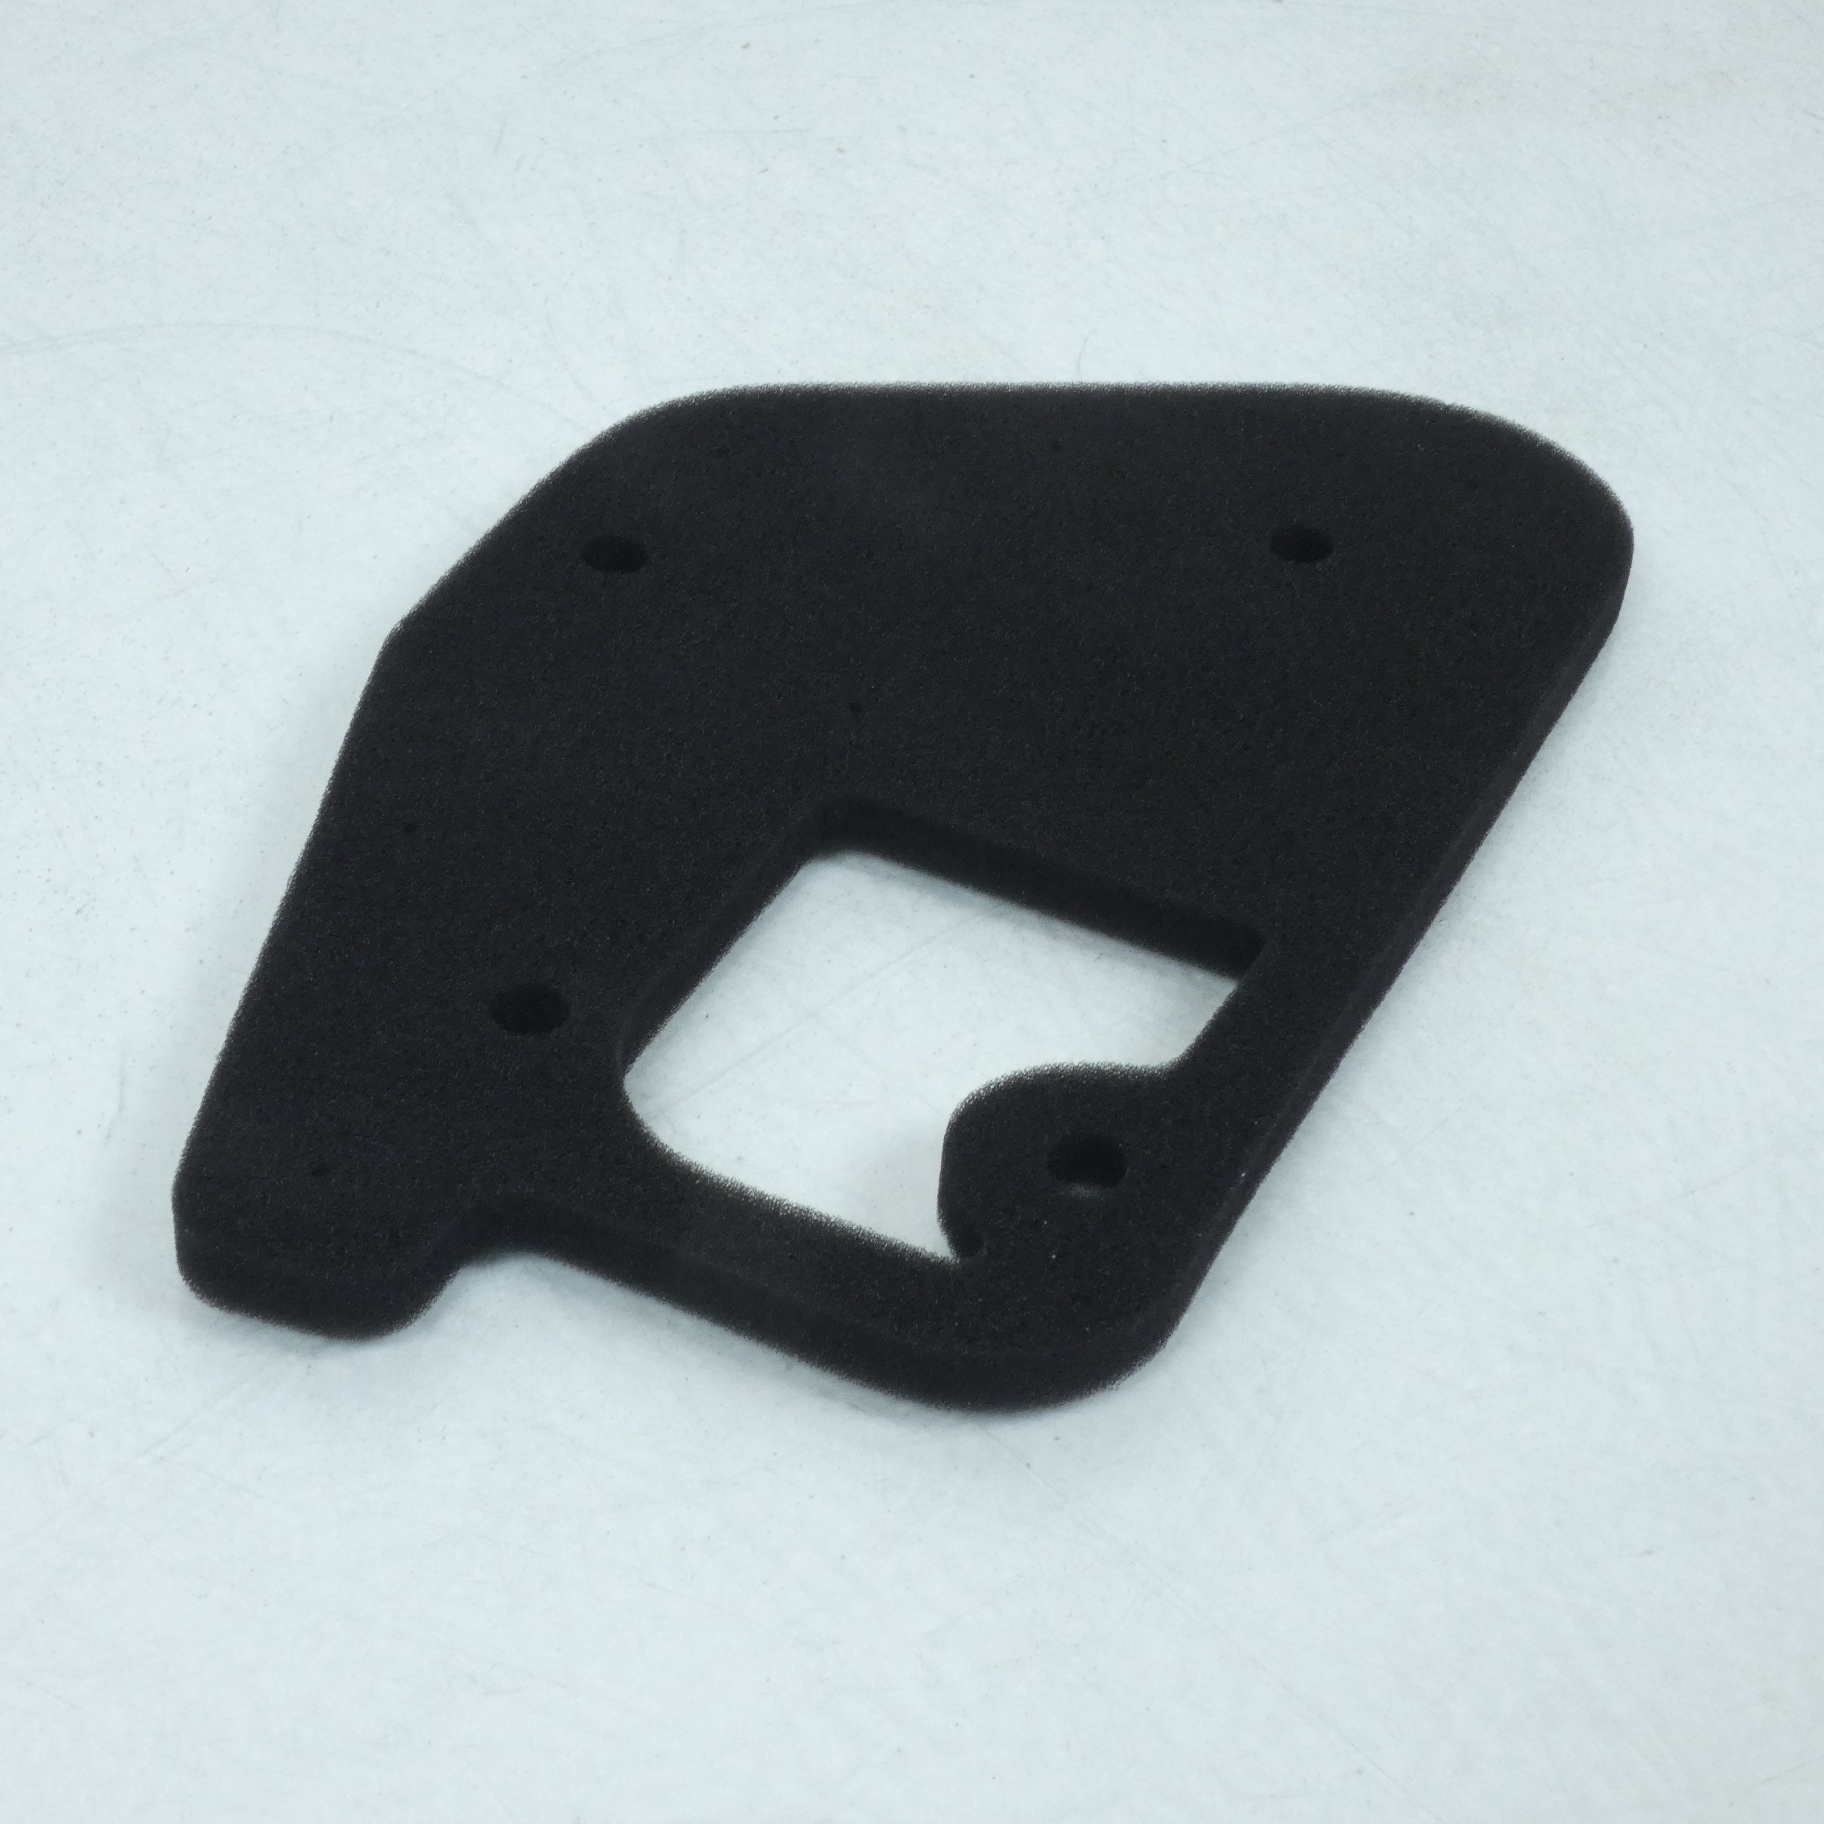 Filtre à air Sifam pour Scooter Yamaha 50 Cw Bw-S Easy 2013 Neuf